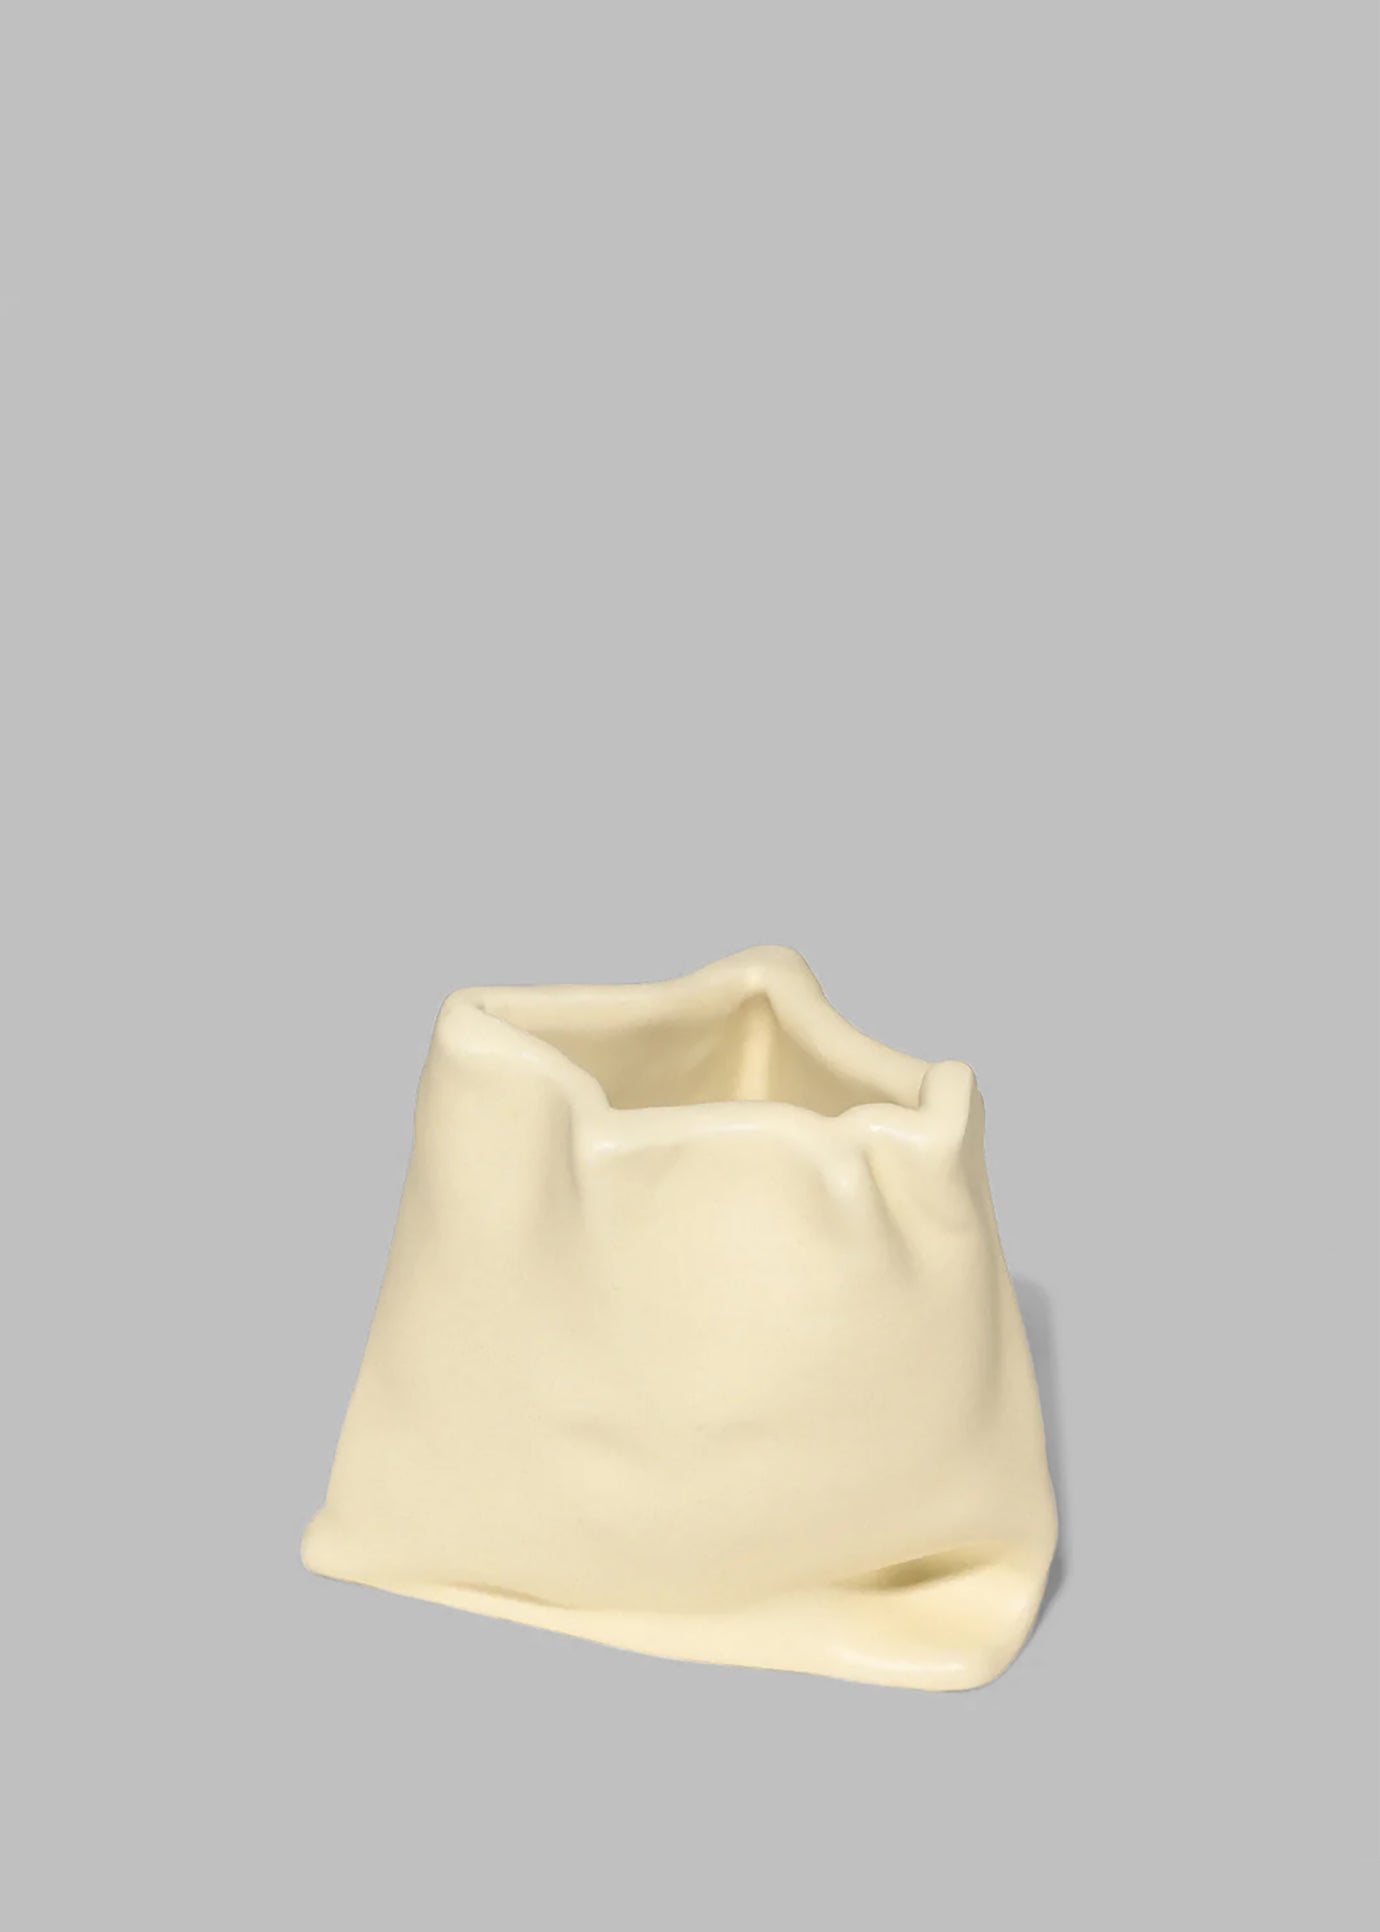 Completedworks Small Vessel - Matte Yellow